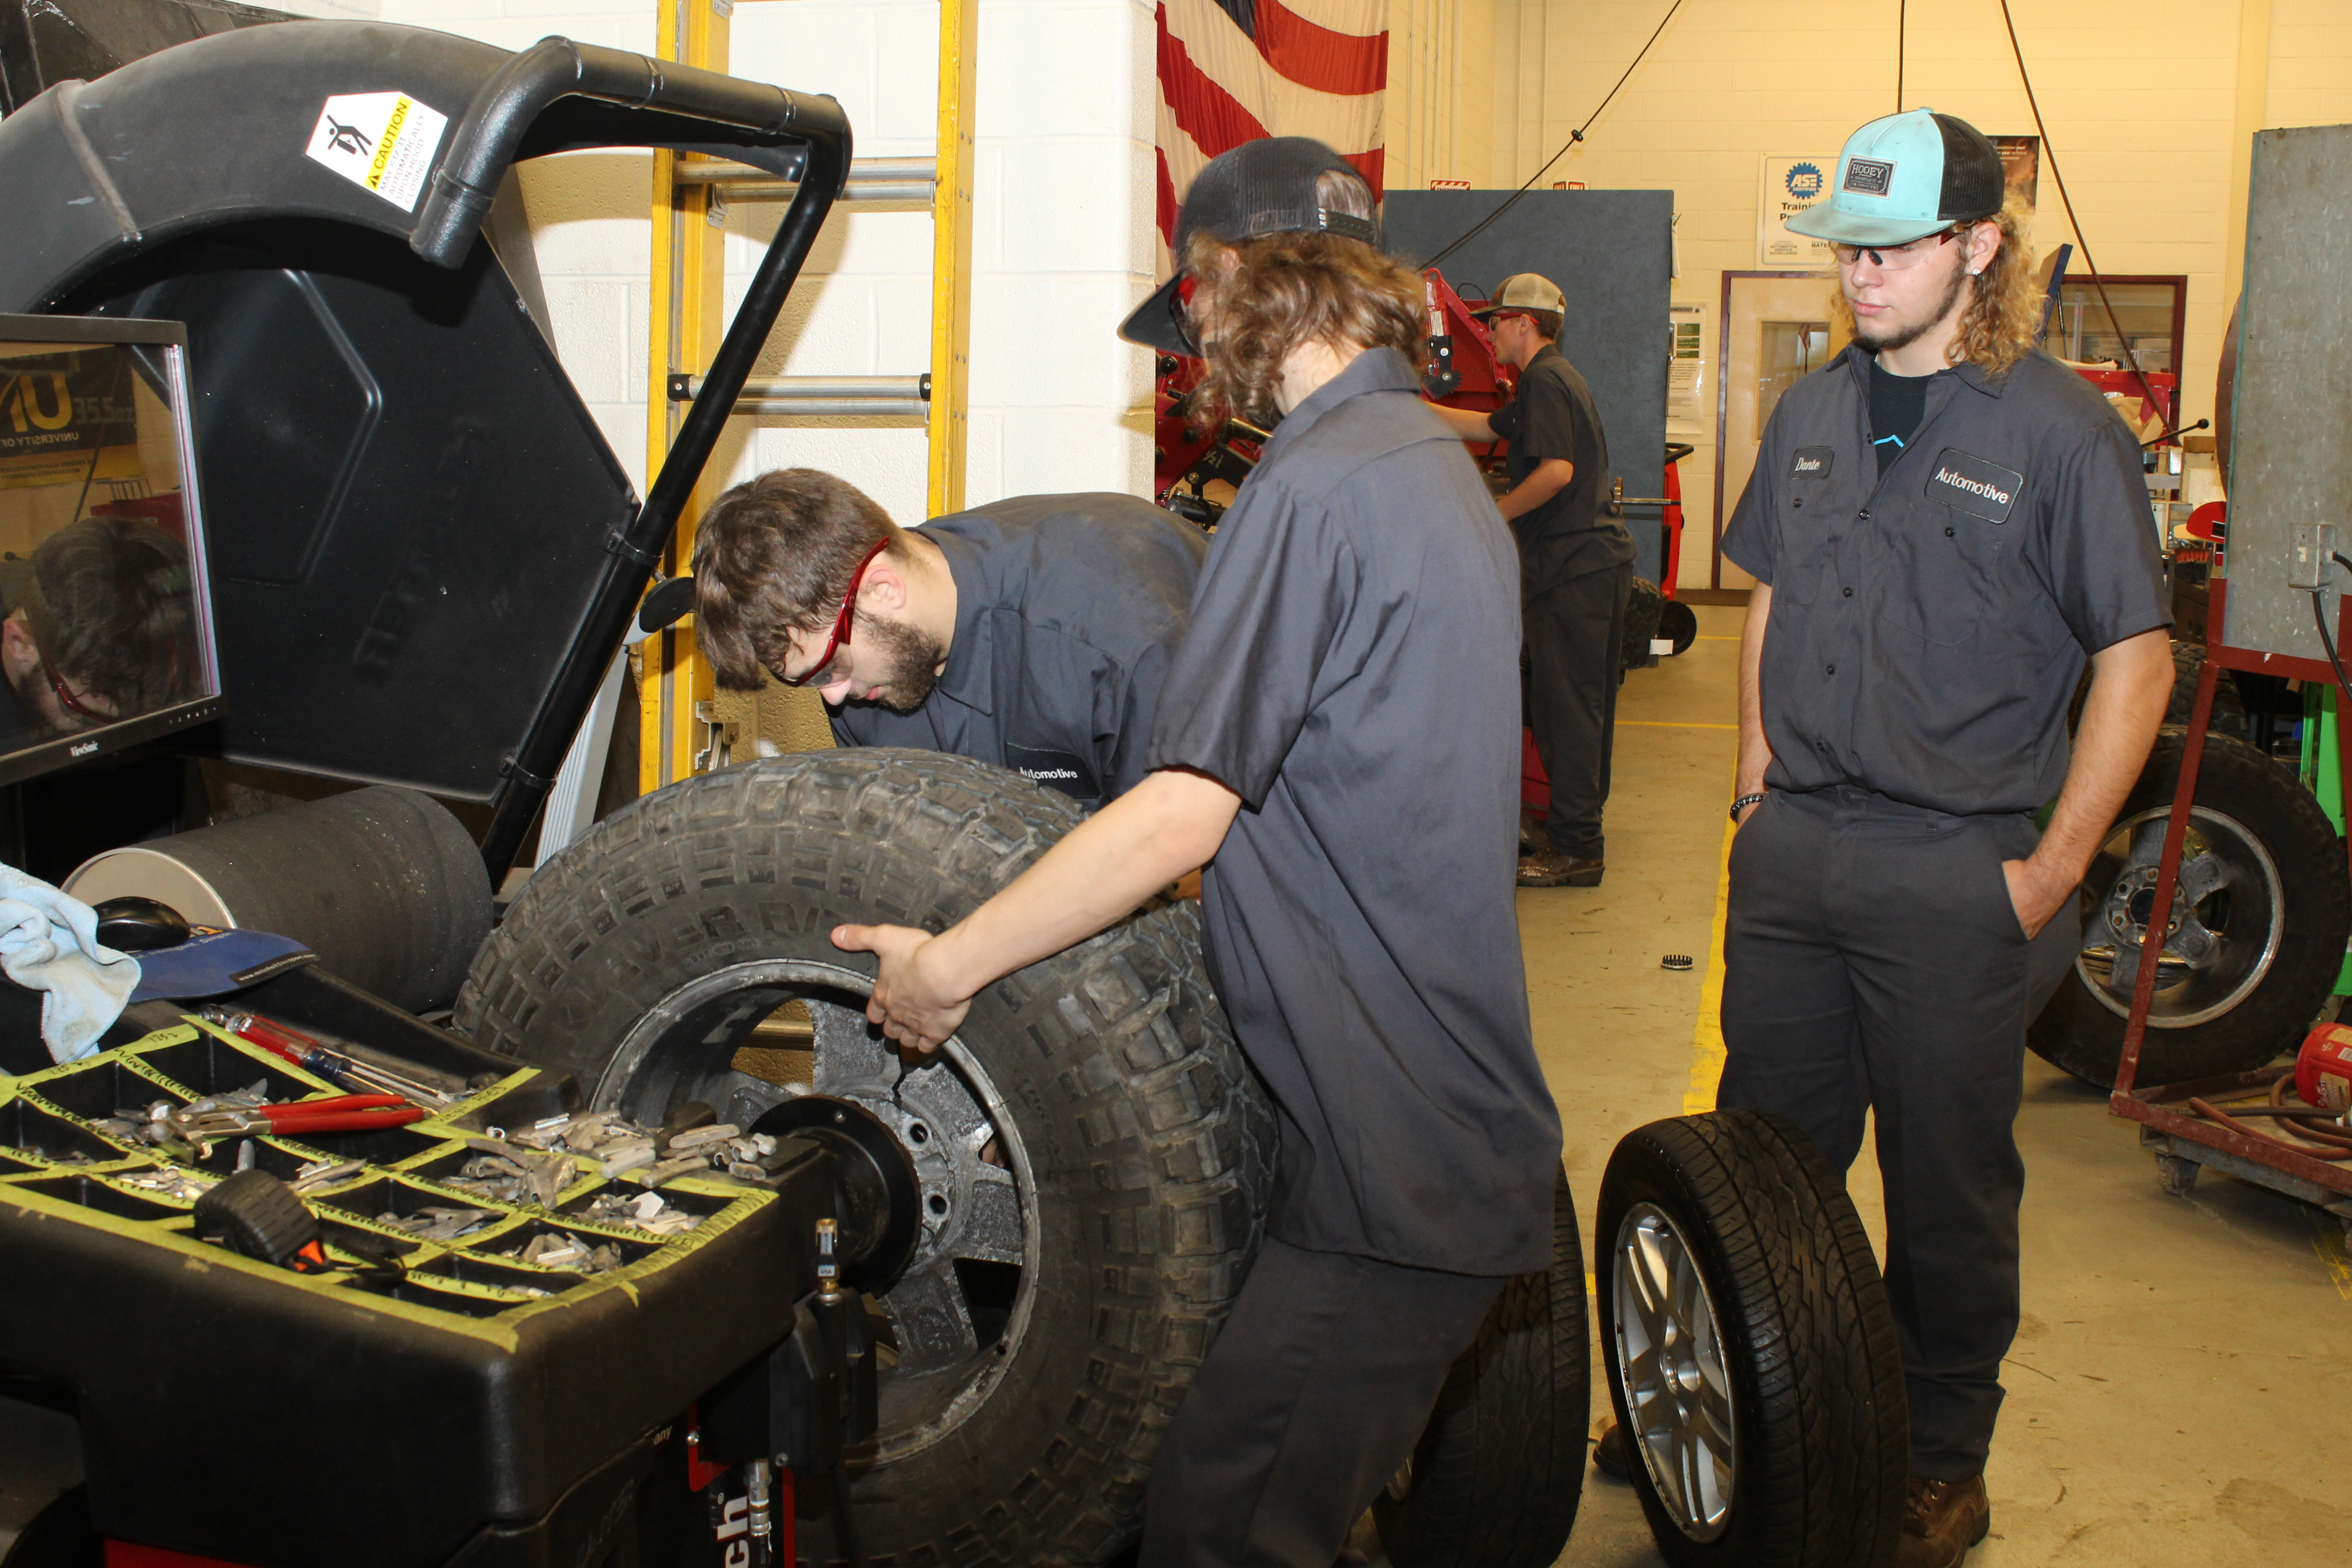 Students work on a late model project car.